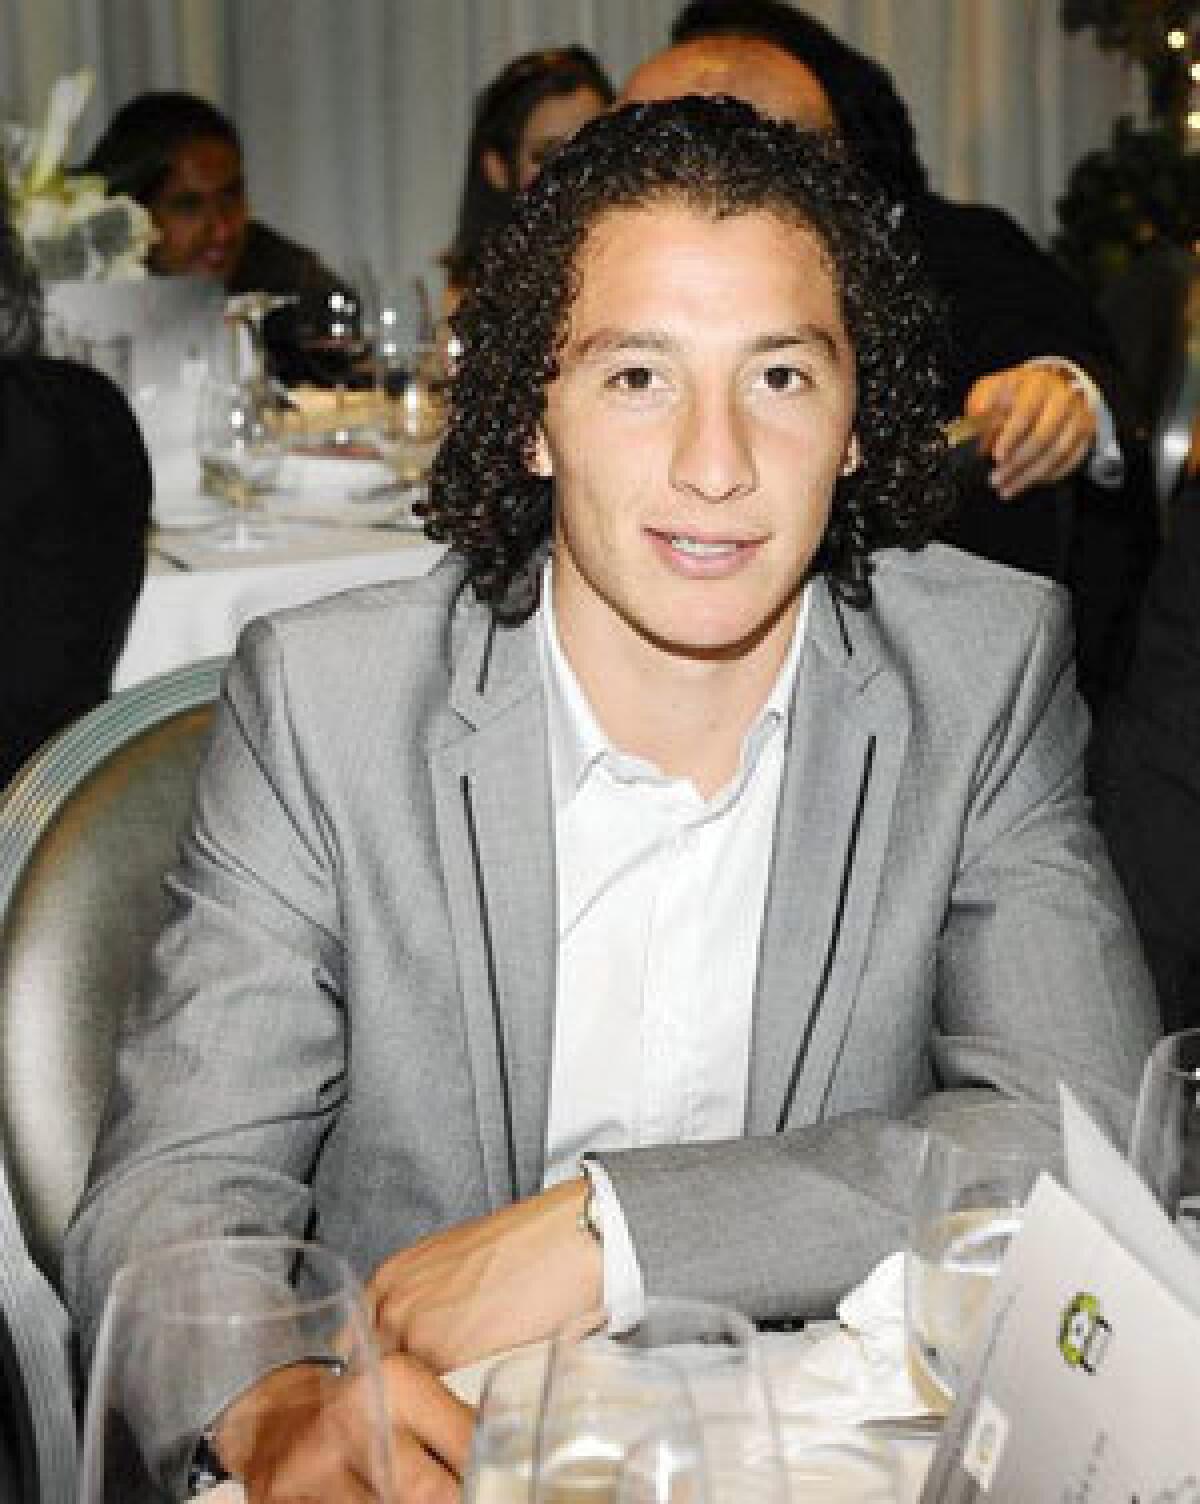 Andres Guardado, a midfielder on the Mexican national soccer team, hawks Degree deodorant.